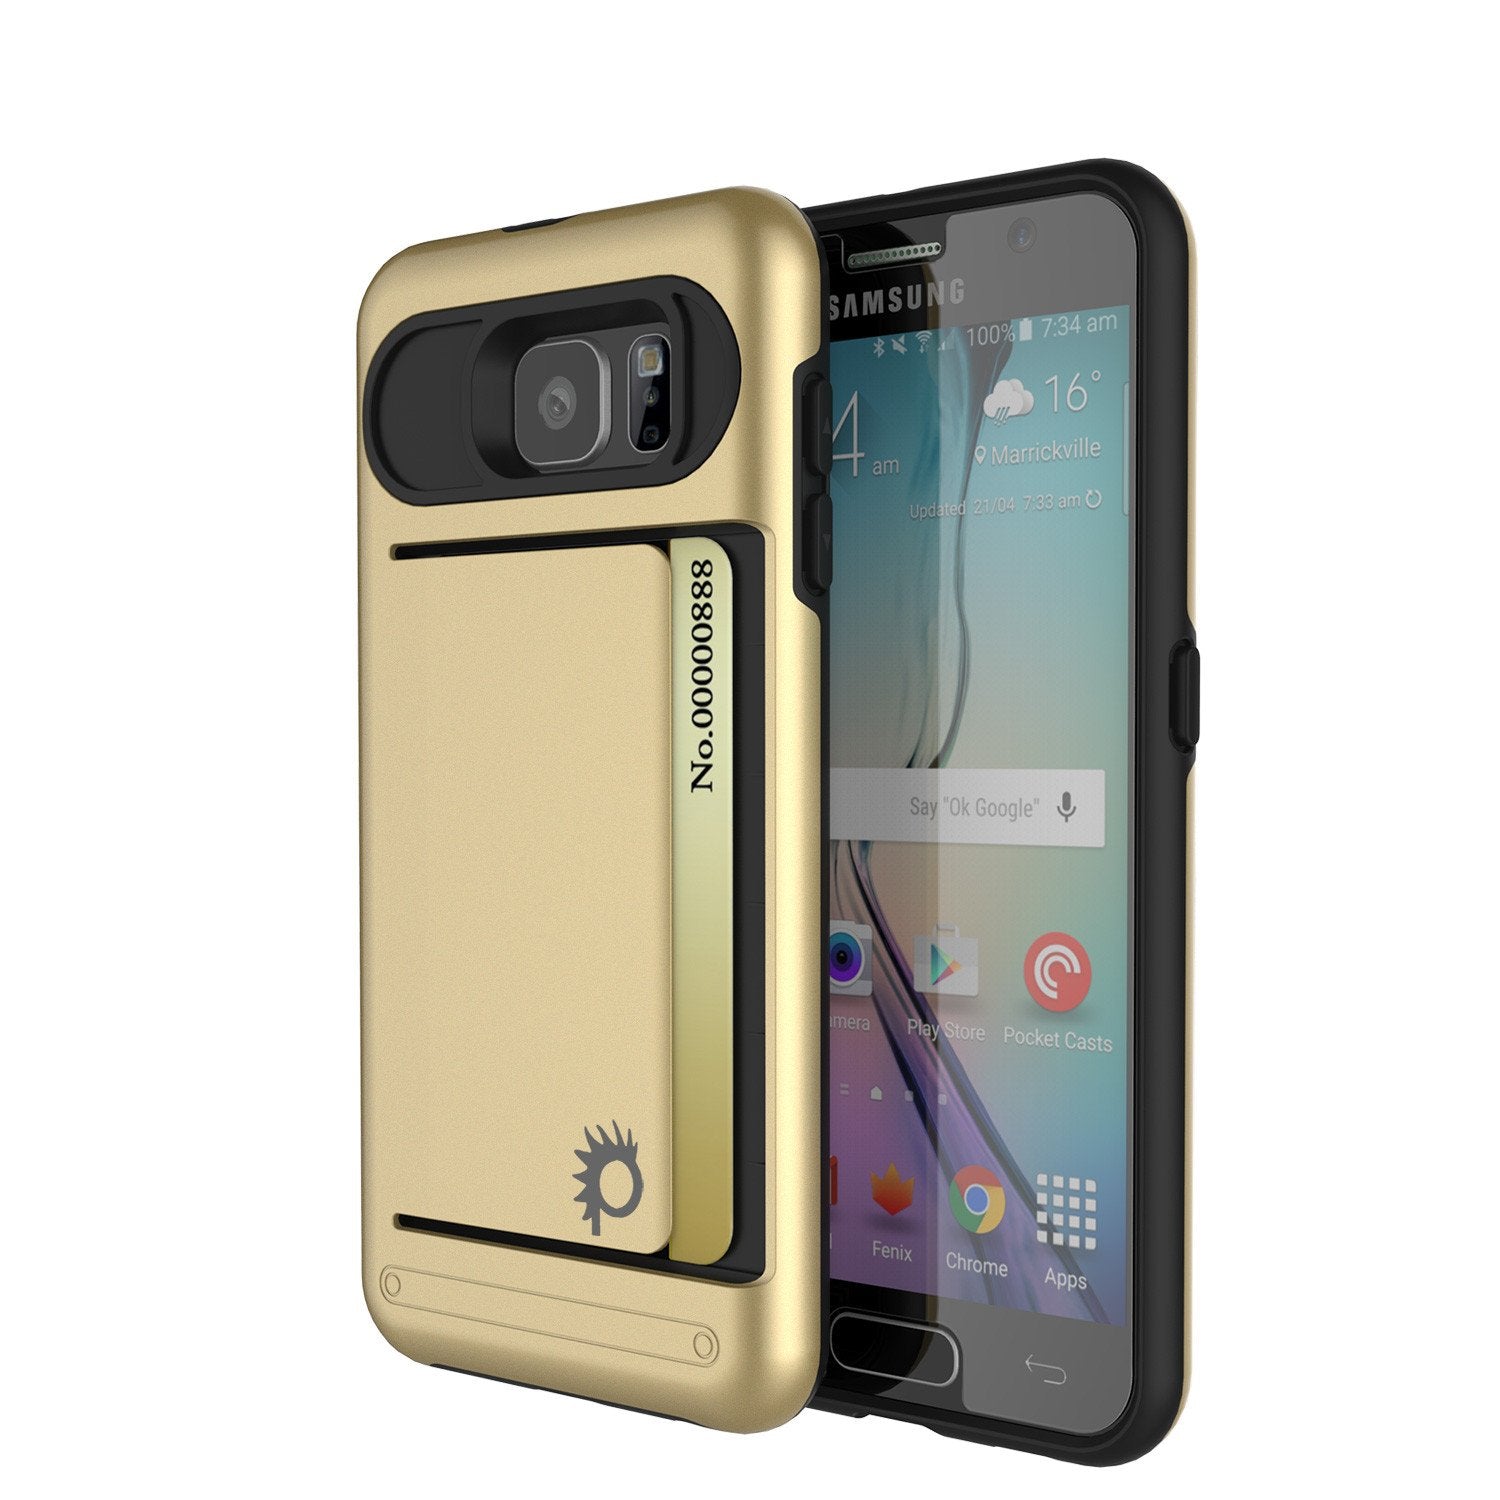 Galaxy s6 Case PunkCase CLUTCH Gold Series Slim Armor Soft Cover Case w/ Tempered Glass - PunkCase NZ